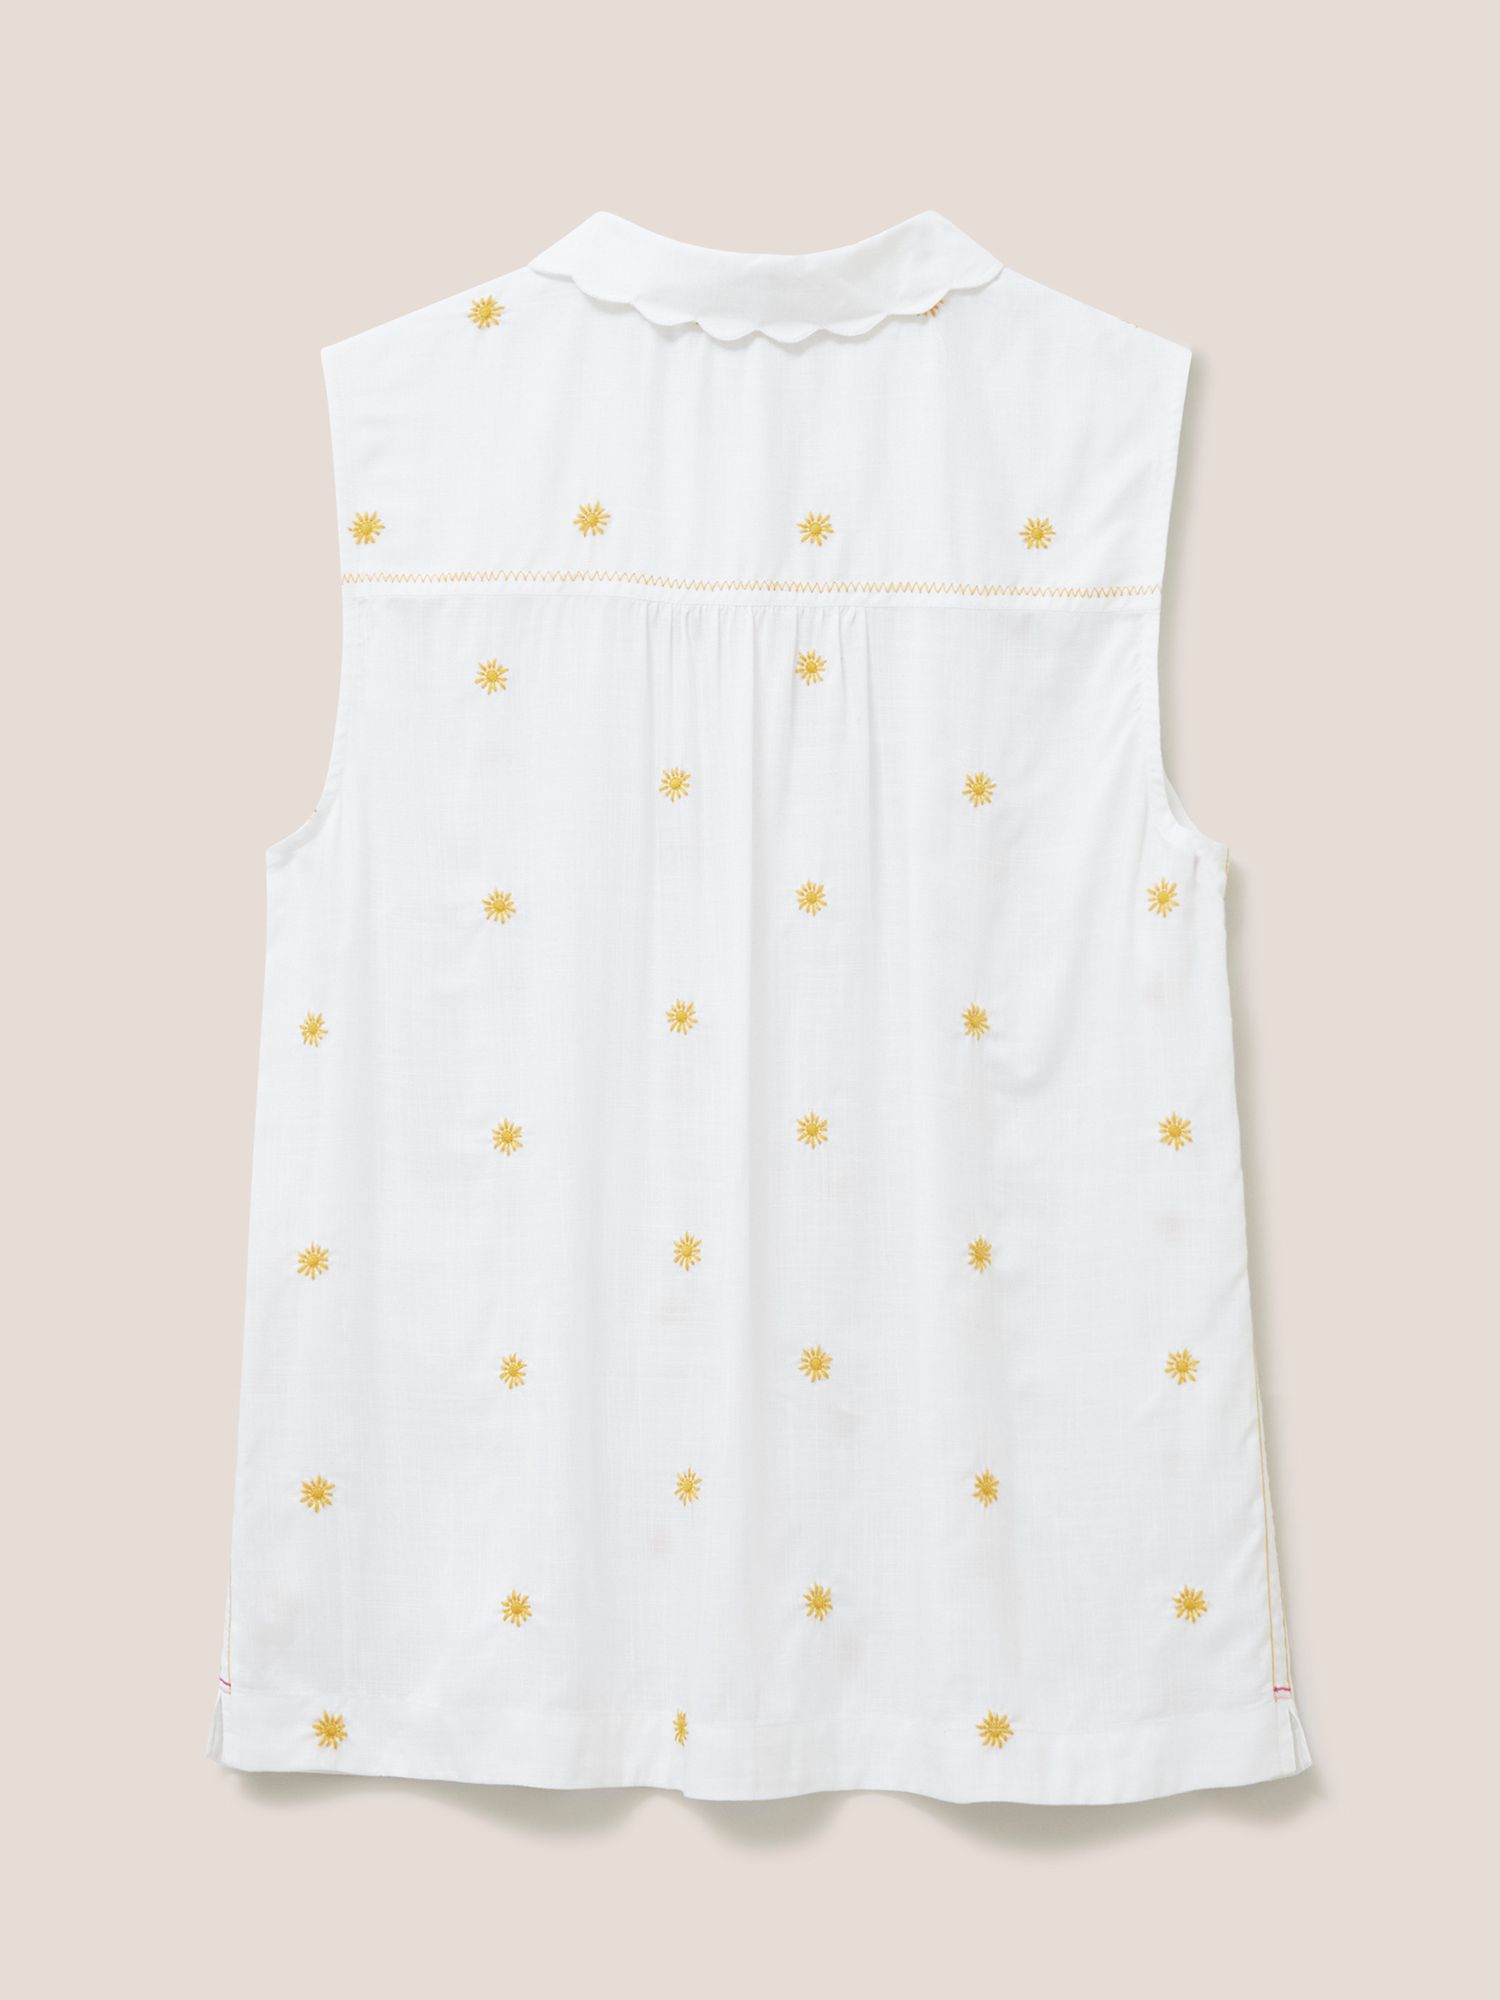 Buy White Stuff Lizzie Embroidered Shirt, White Multi Online at johnlewis.com